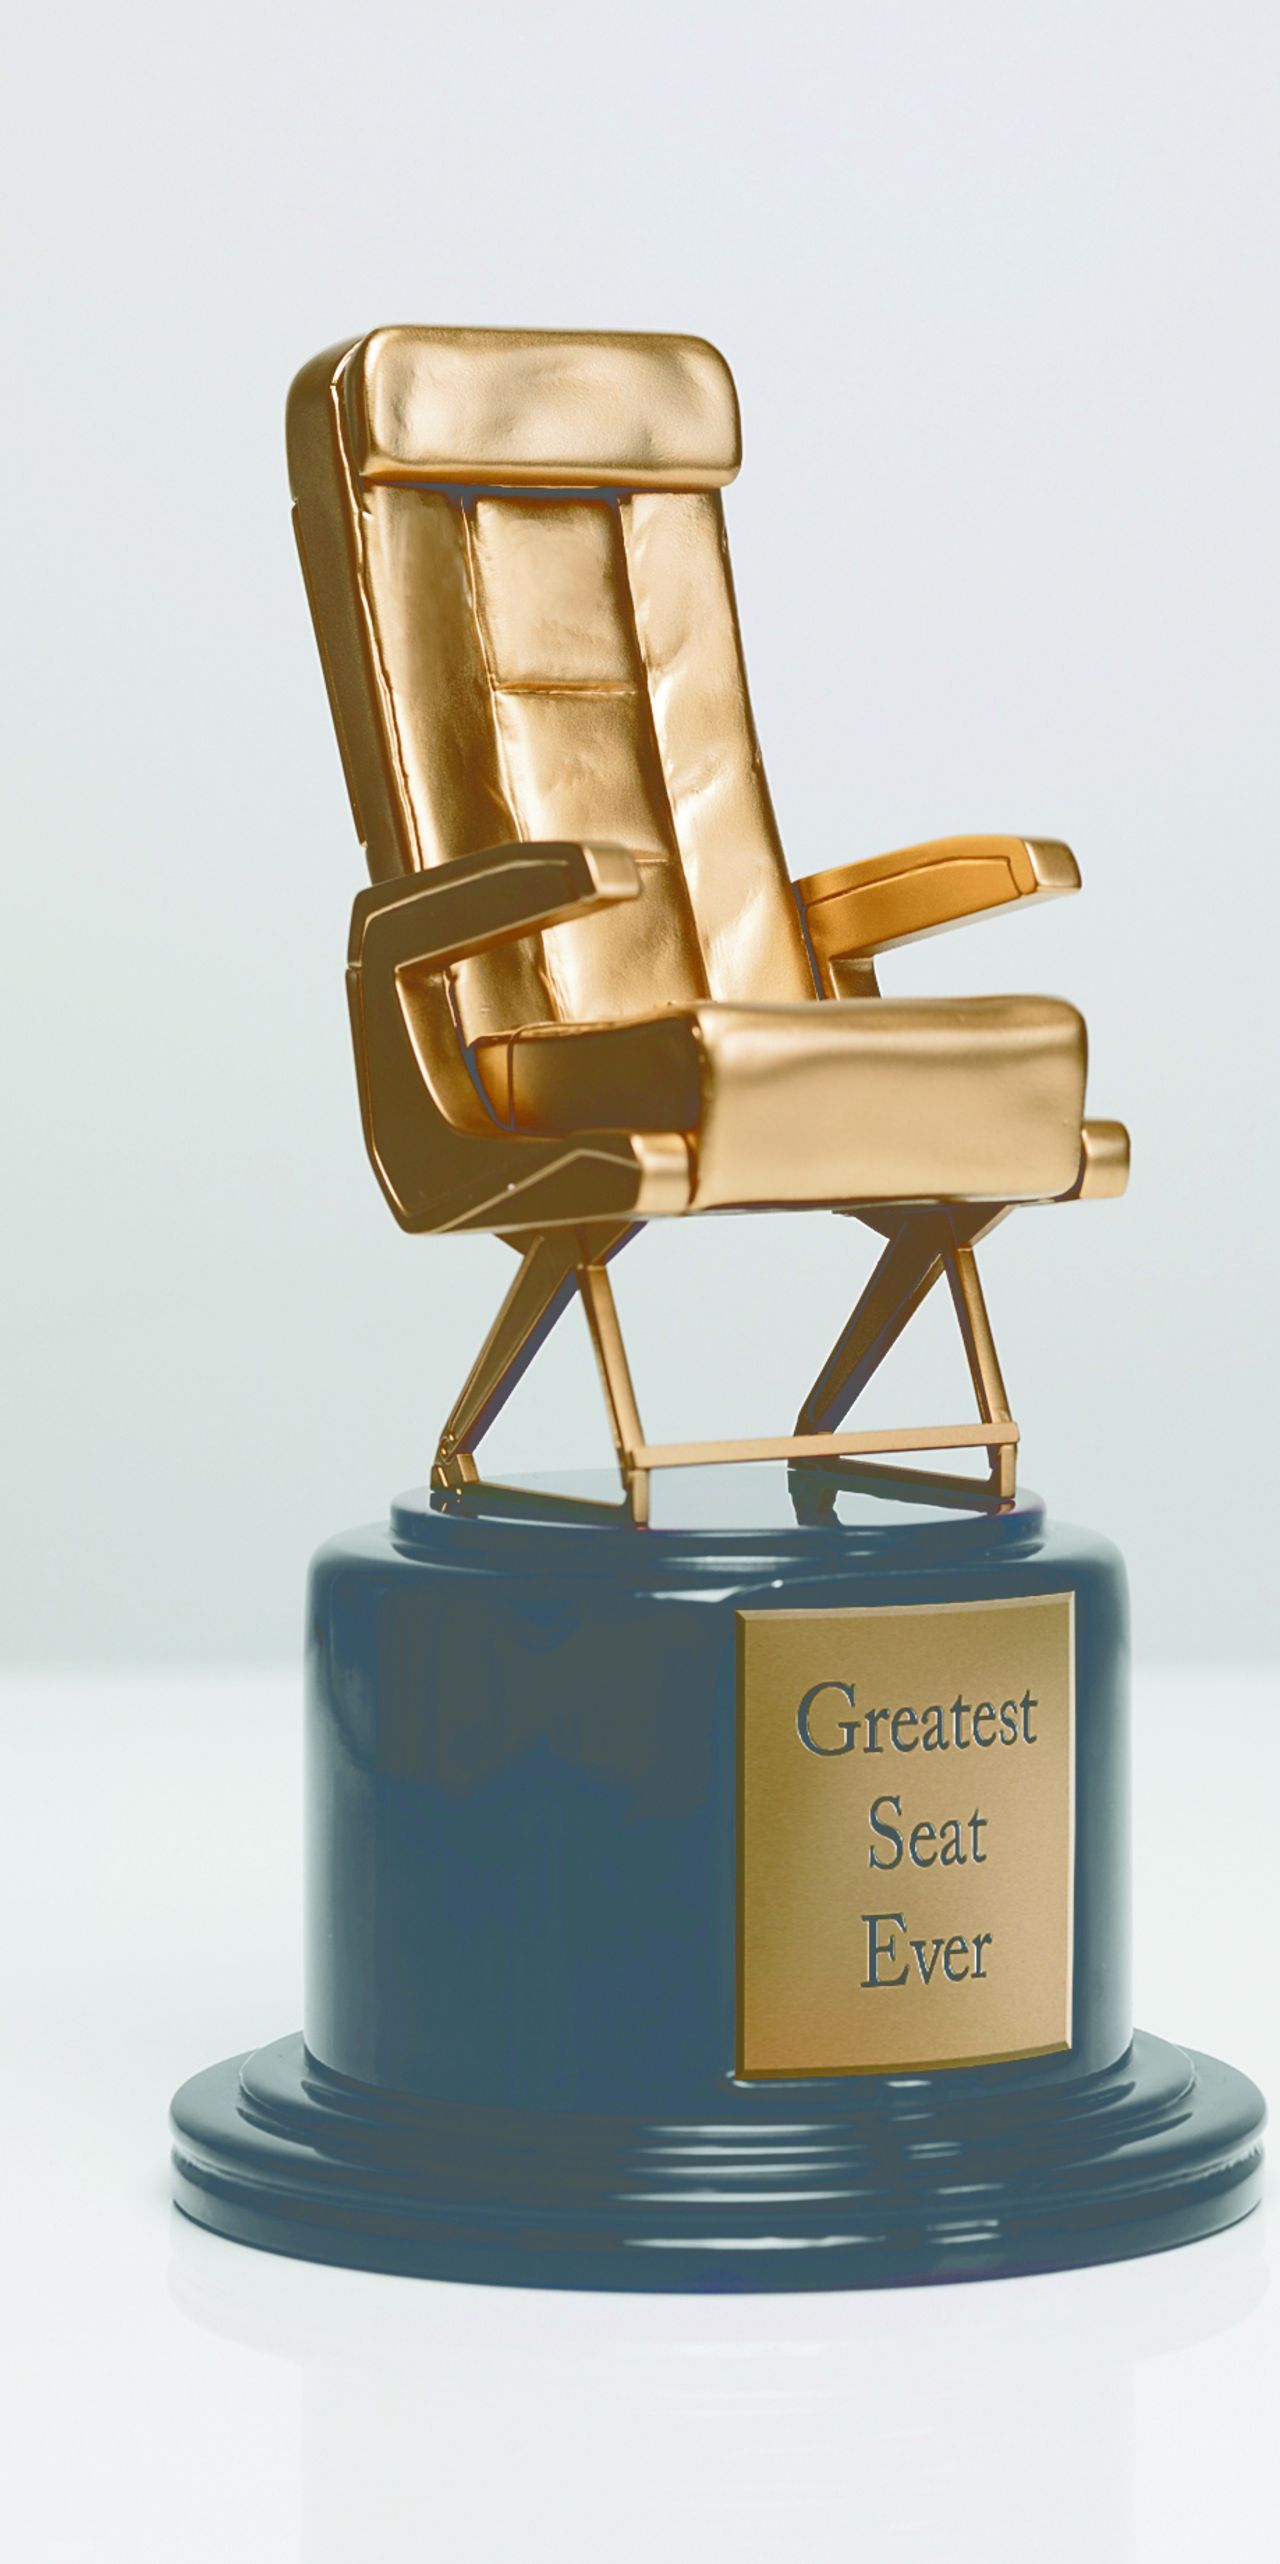 Snag an award seat from airlines that make it easy. 